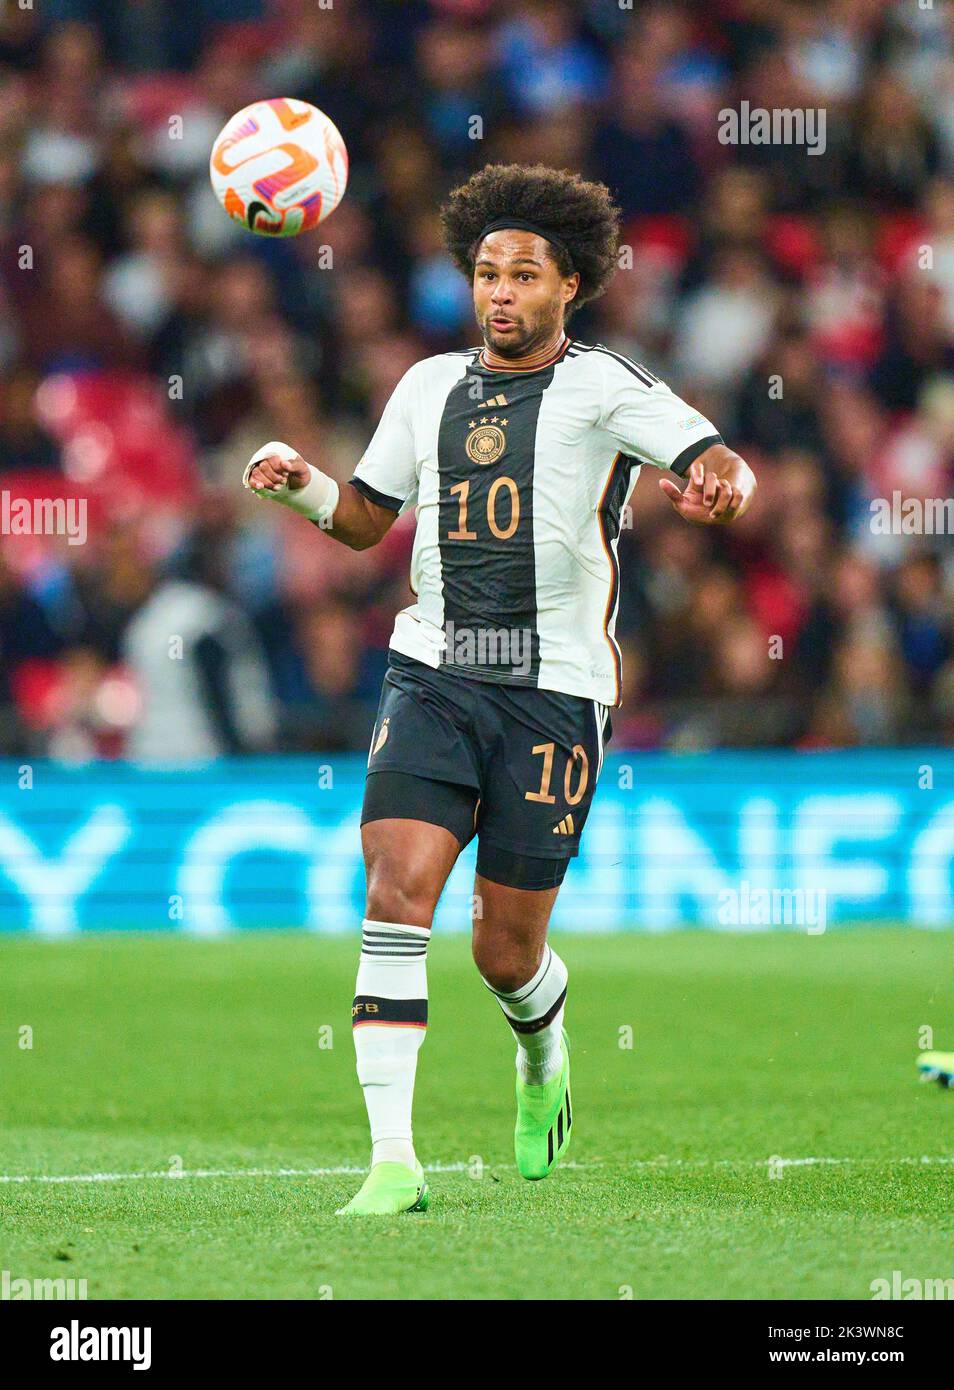 Serge Gnabry, DFB 10  in the UEFA Nations League 2022 match  ENGLAND - GERMANY 3-3  in Season 2022/2023 on Sept 26, 2022  in London, Great Britain.  © Peter Schatz / Alamy Live News Stock Photo